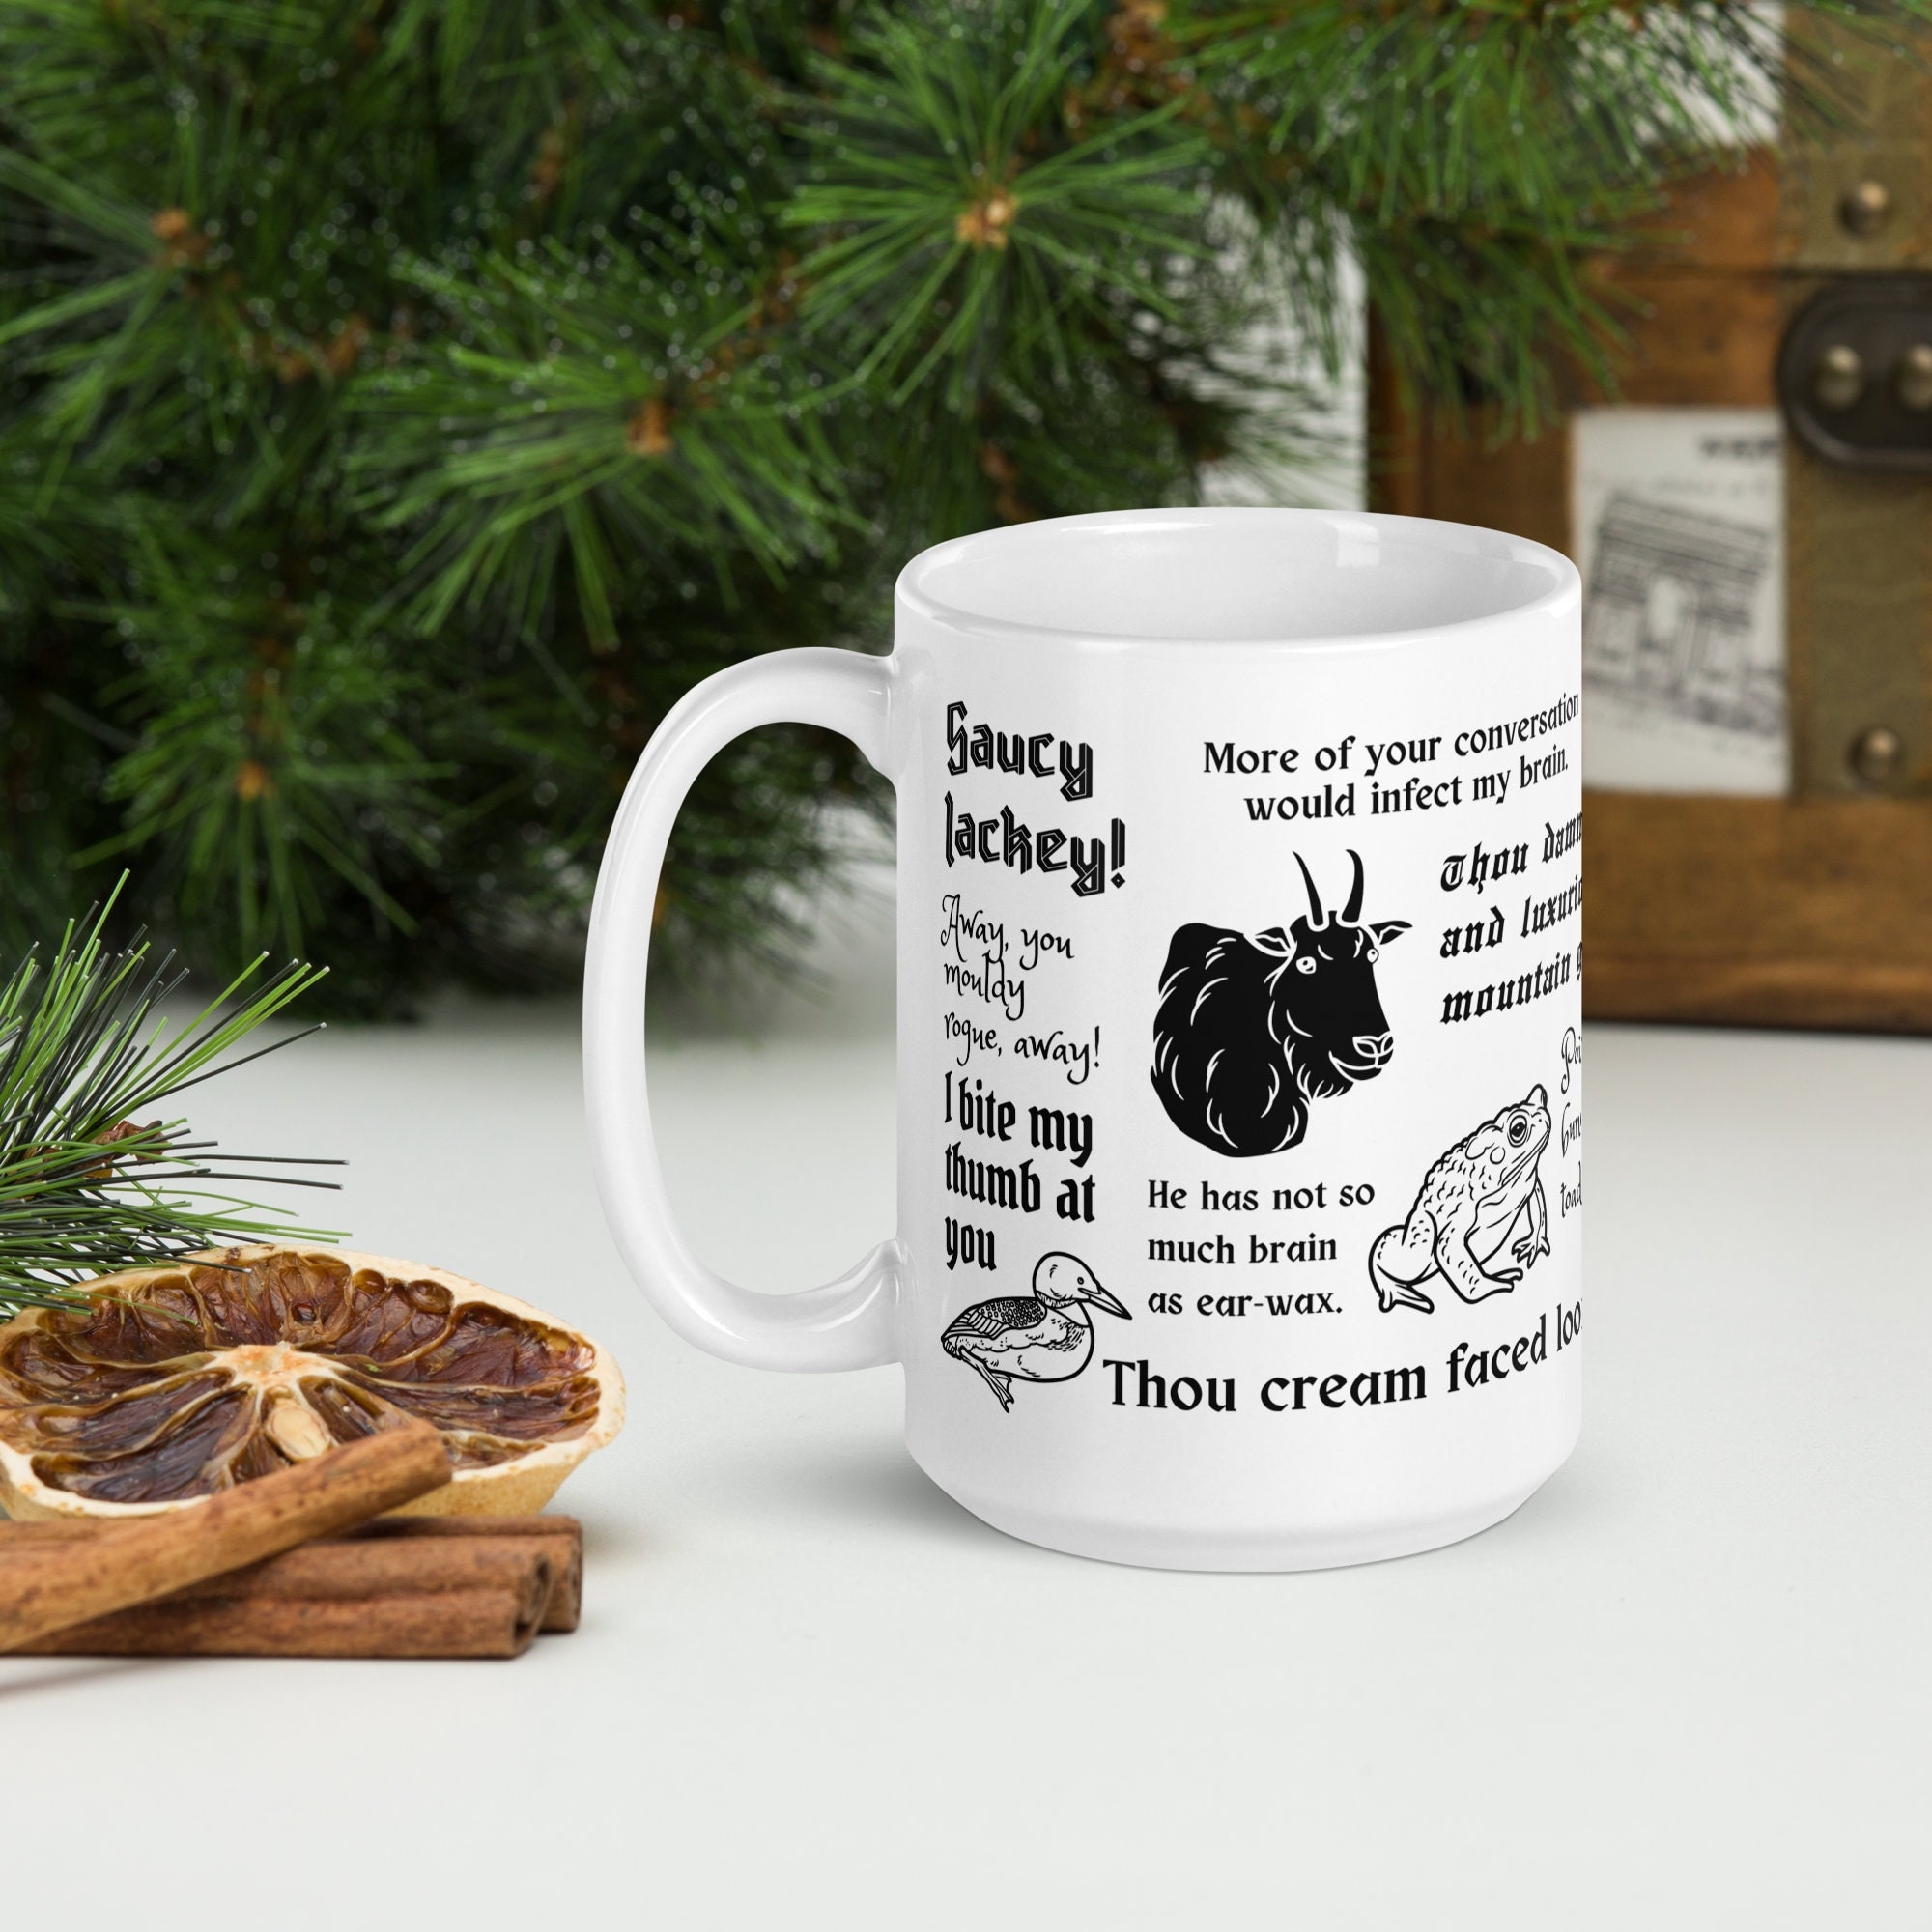 Best Insulting Gift Ideas